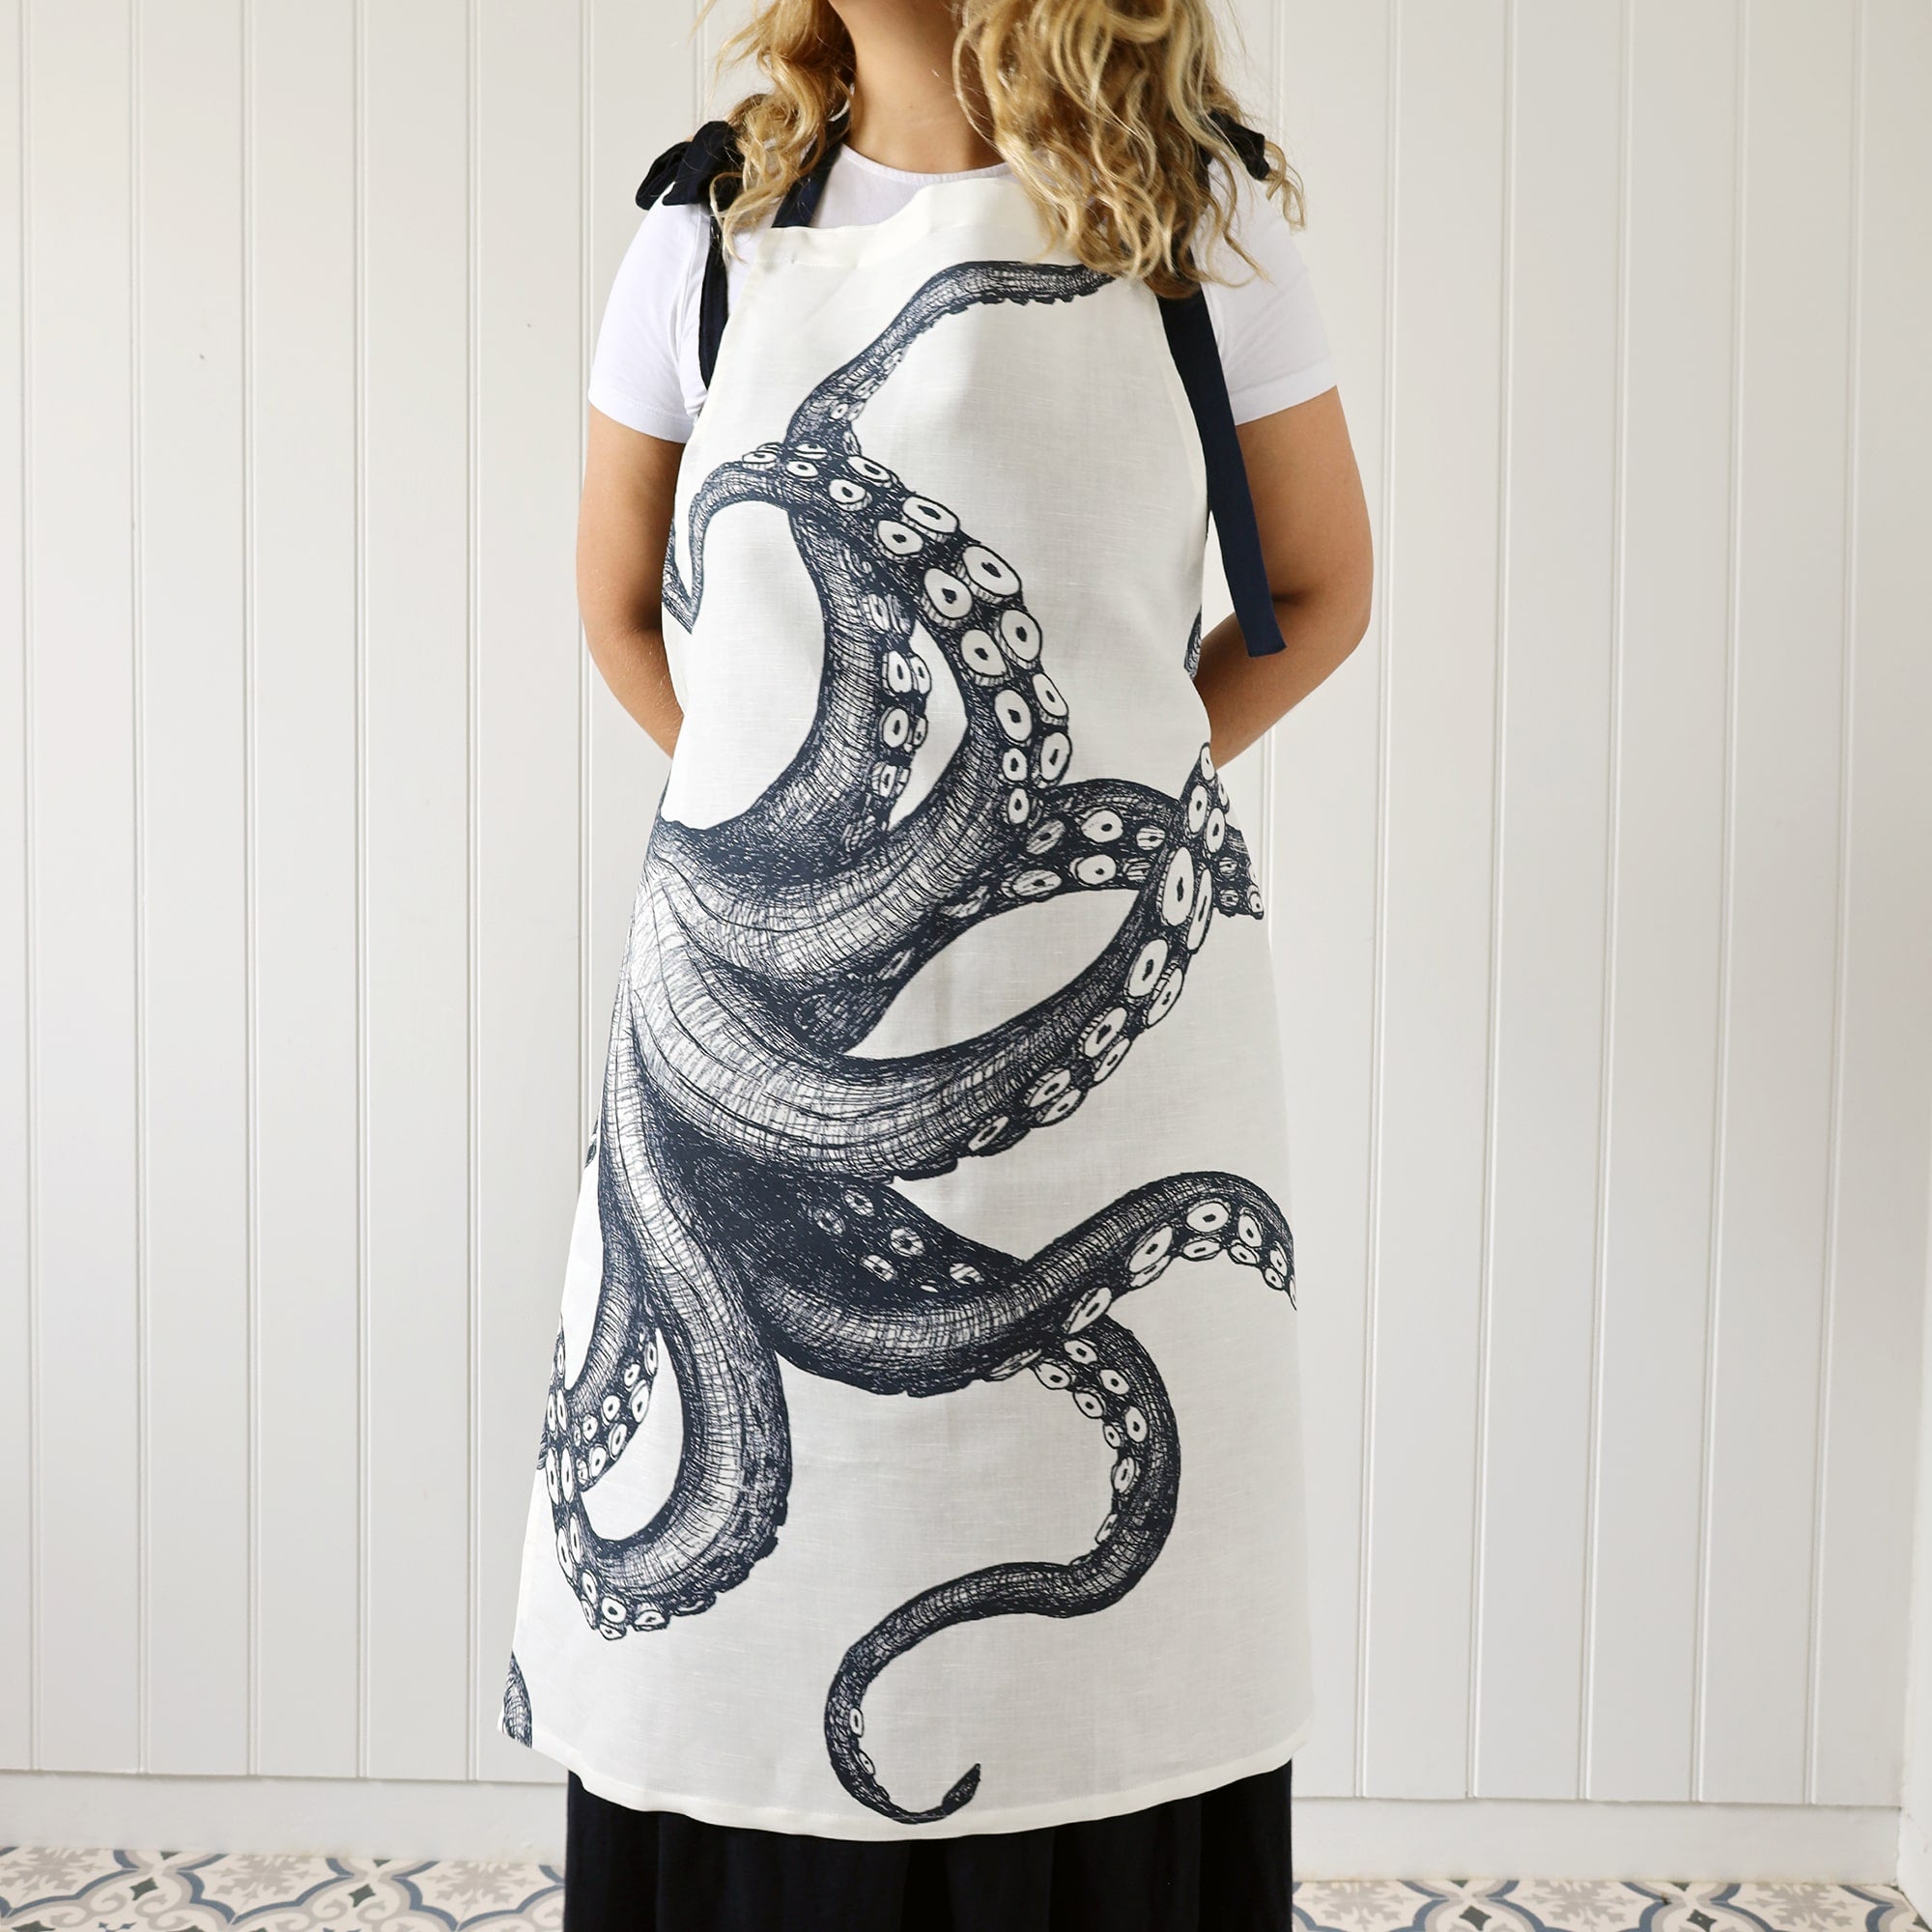 Our octopus apron being worn by a model